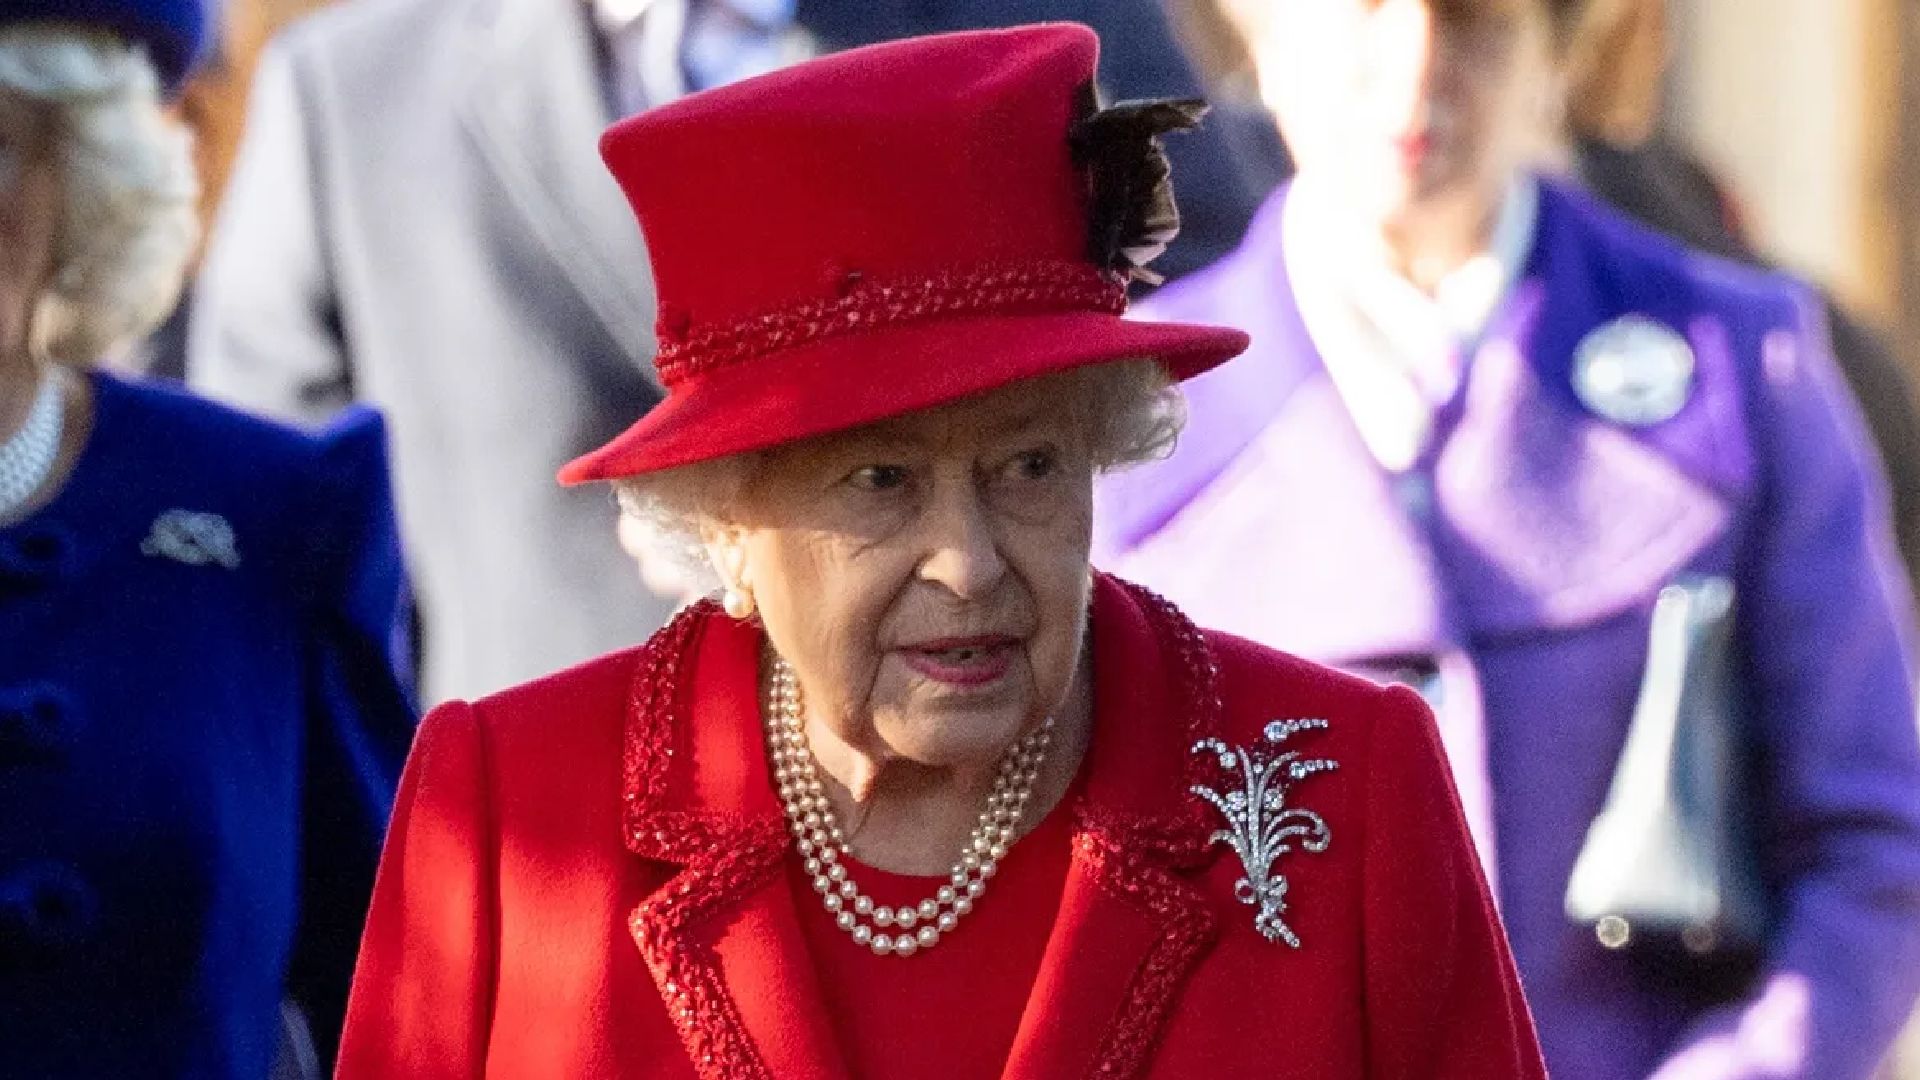 <p>                     Traditionally Queen Elizabeth headed to Sandringham House and travelled to the church of St Mary Magdalene for the Christmas Day service, where crowds lined the way hoping for a glimpse of the royals. For many people, the sight of the Queen attending church was perhaps just as much of an iconic Yuletide moment as her Christmas speech.                   </p>